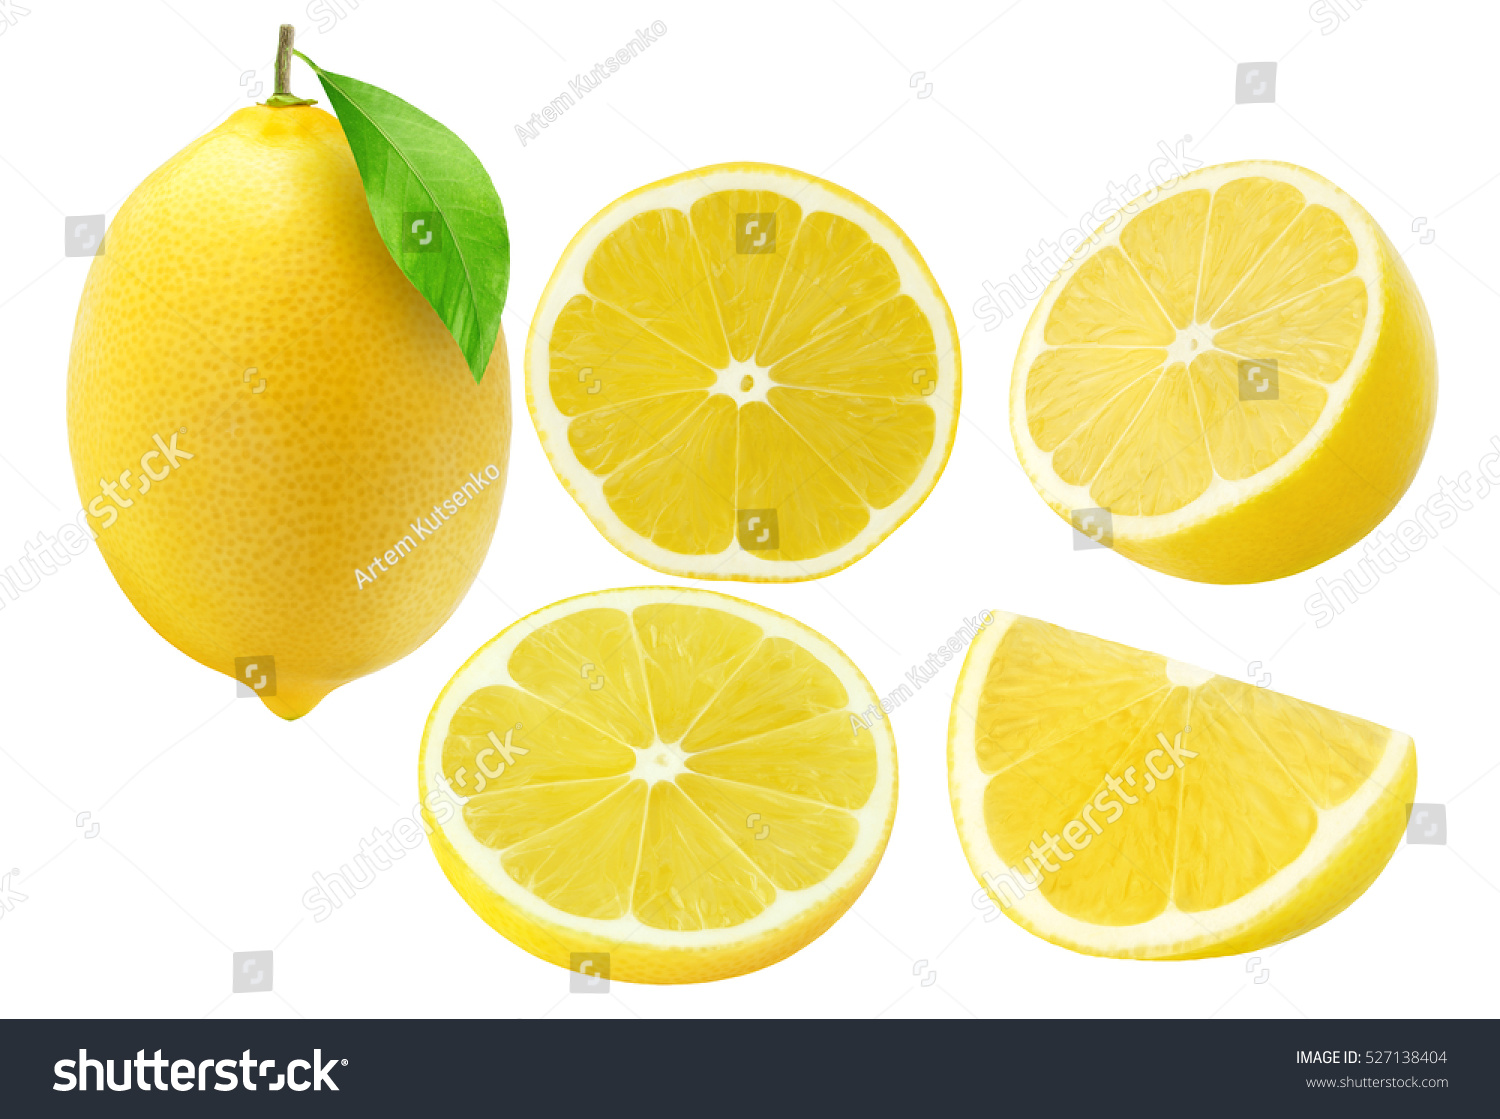 Collection of lemon fruits isolated on white #527138404